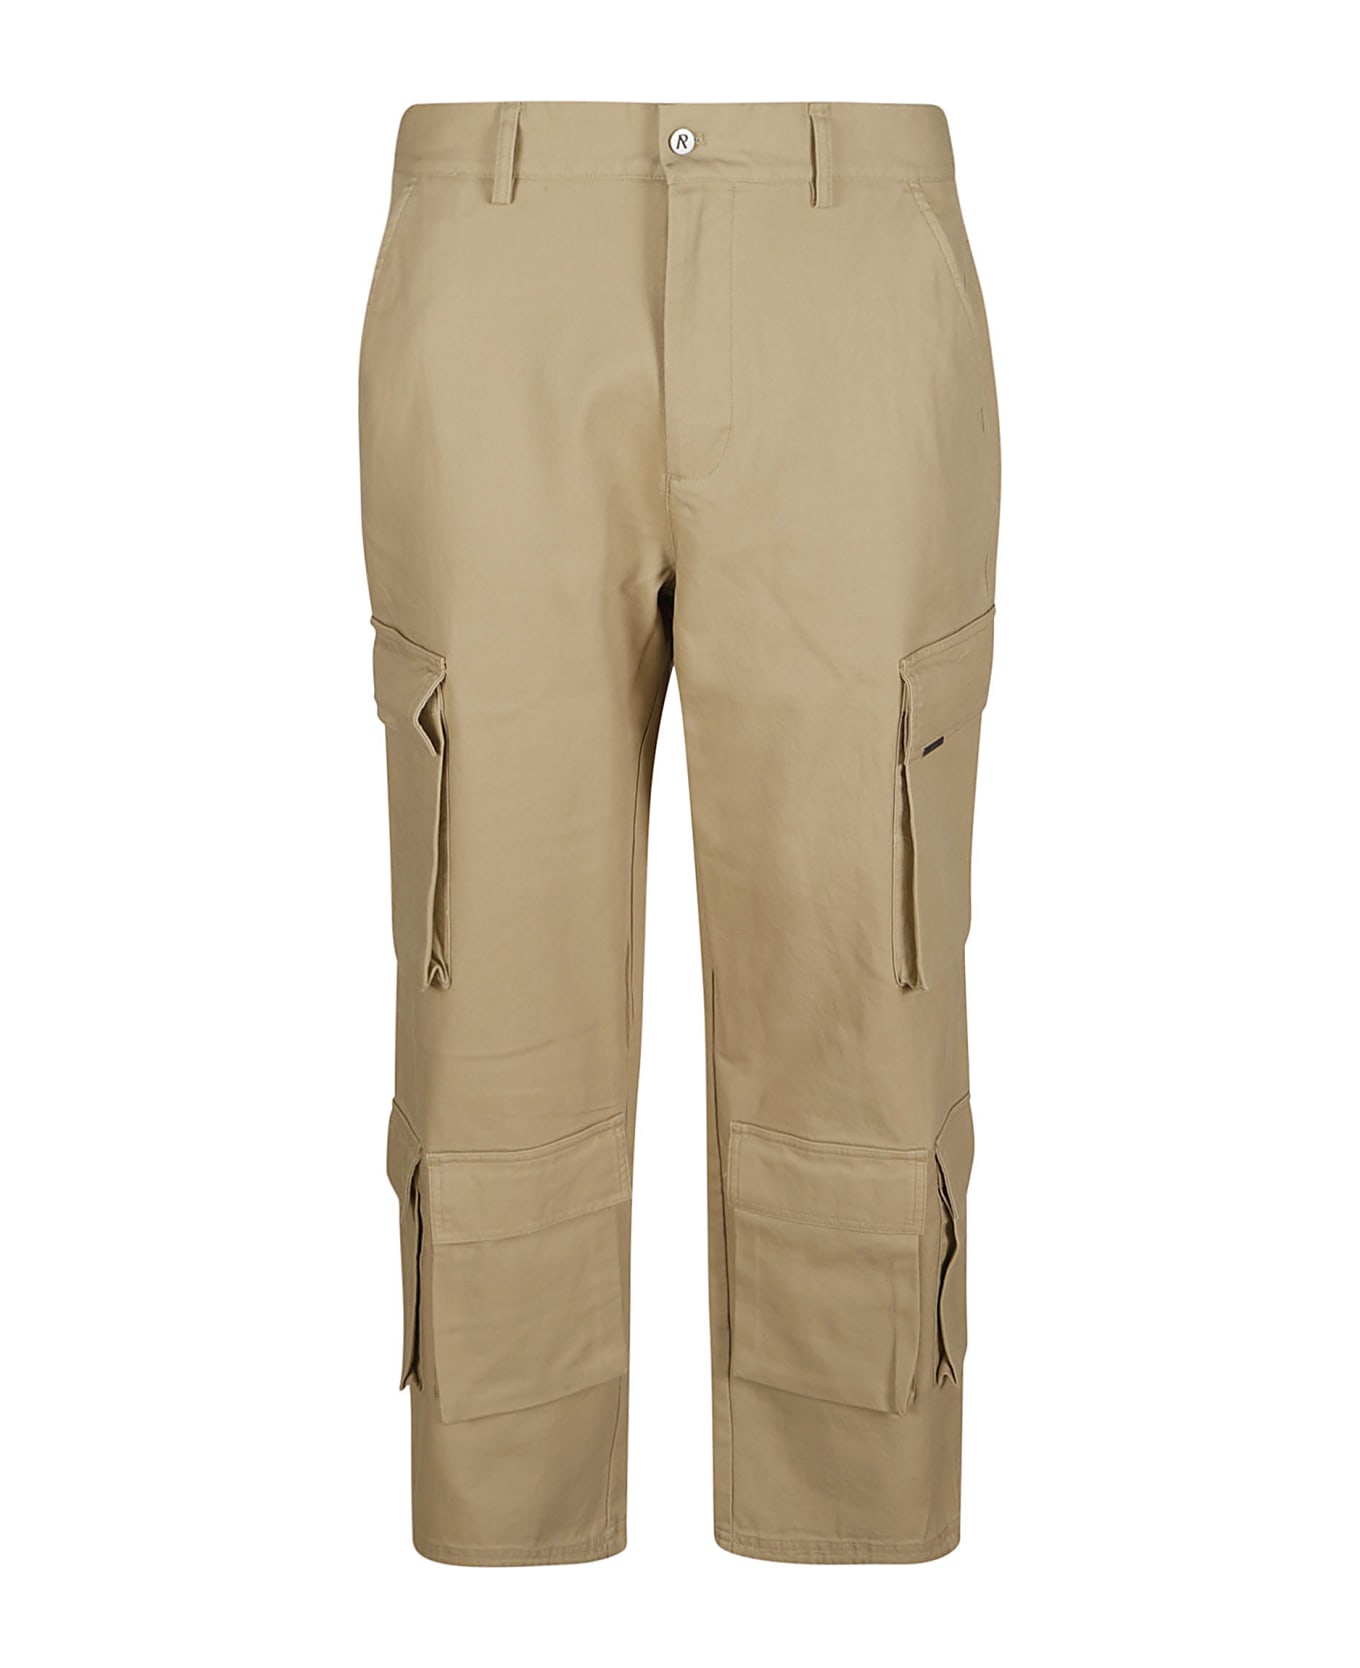 REPRESENT Baggy Cargo Trousers - Sandstone ボトムス